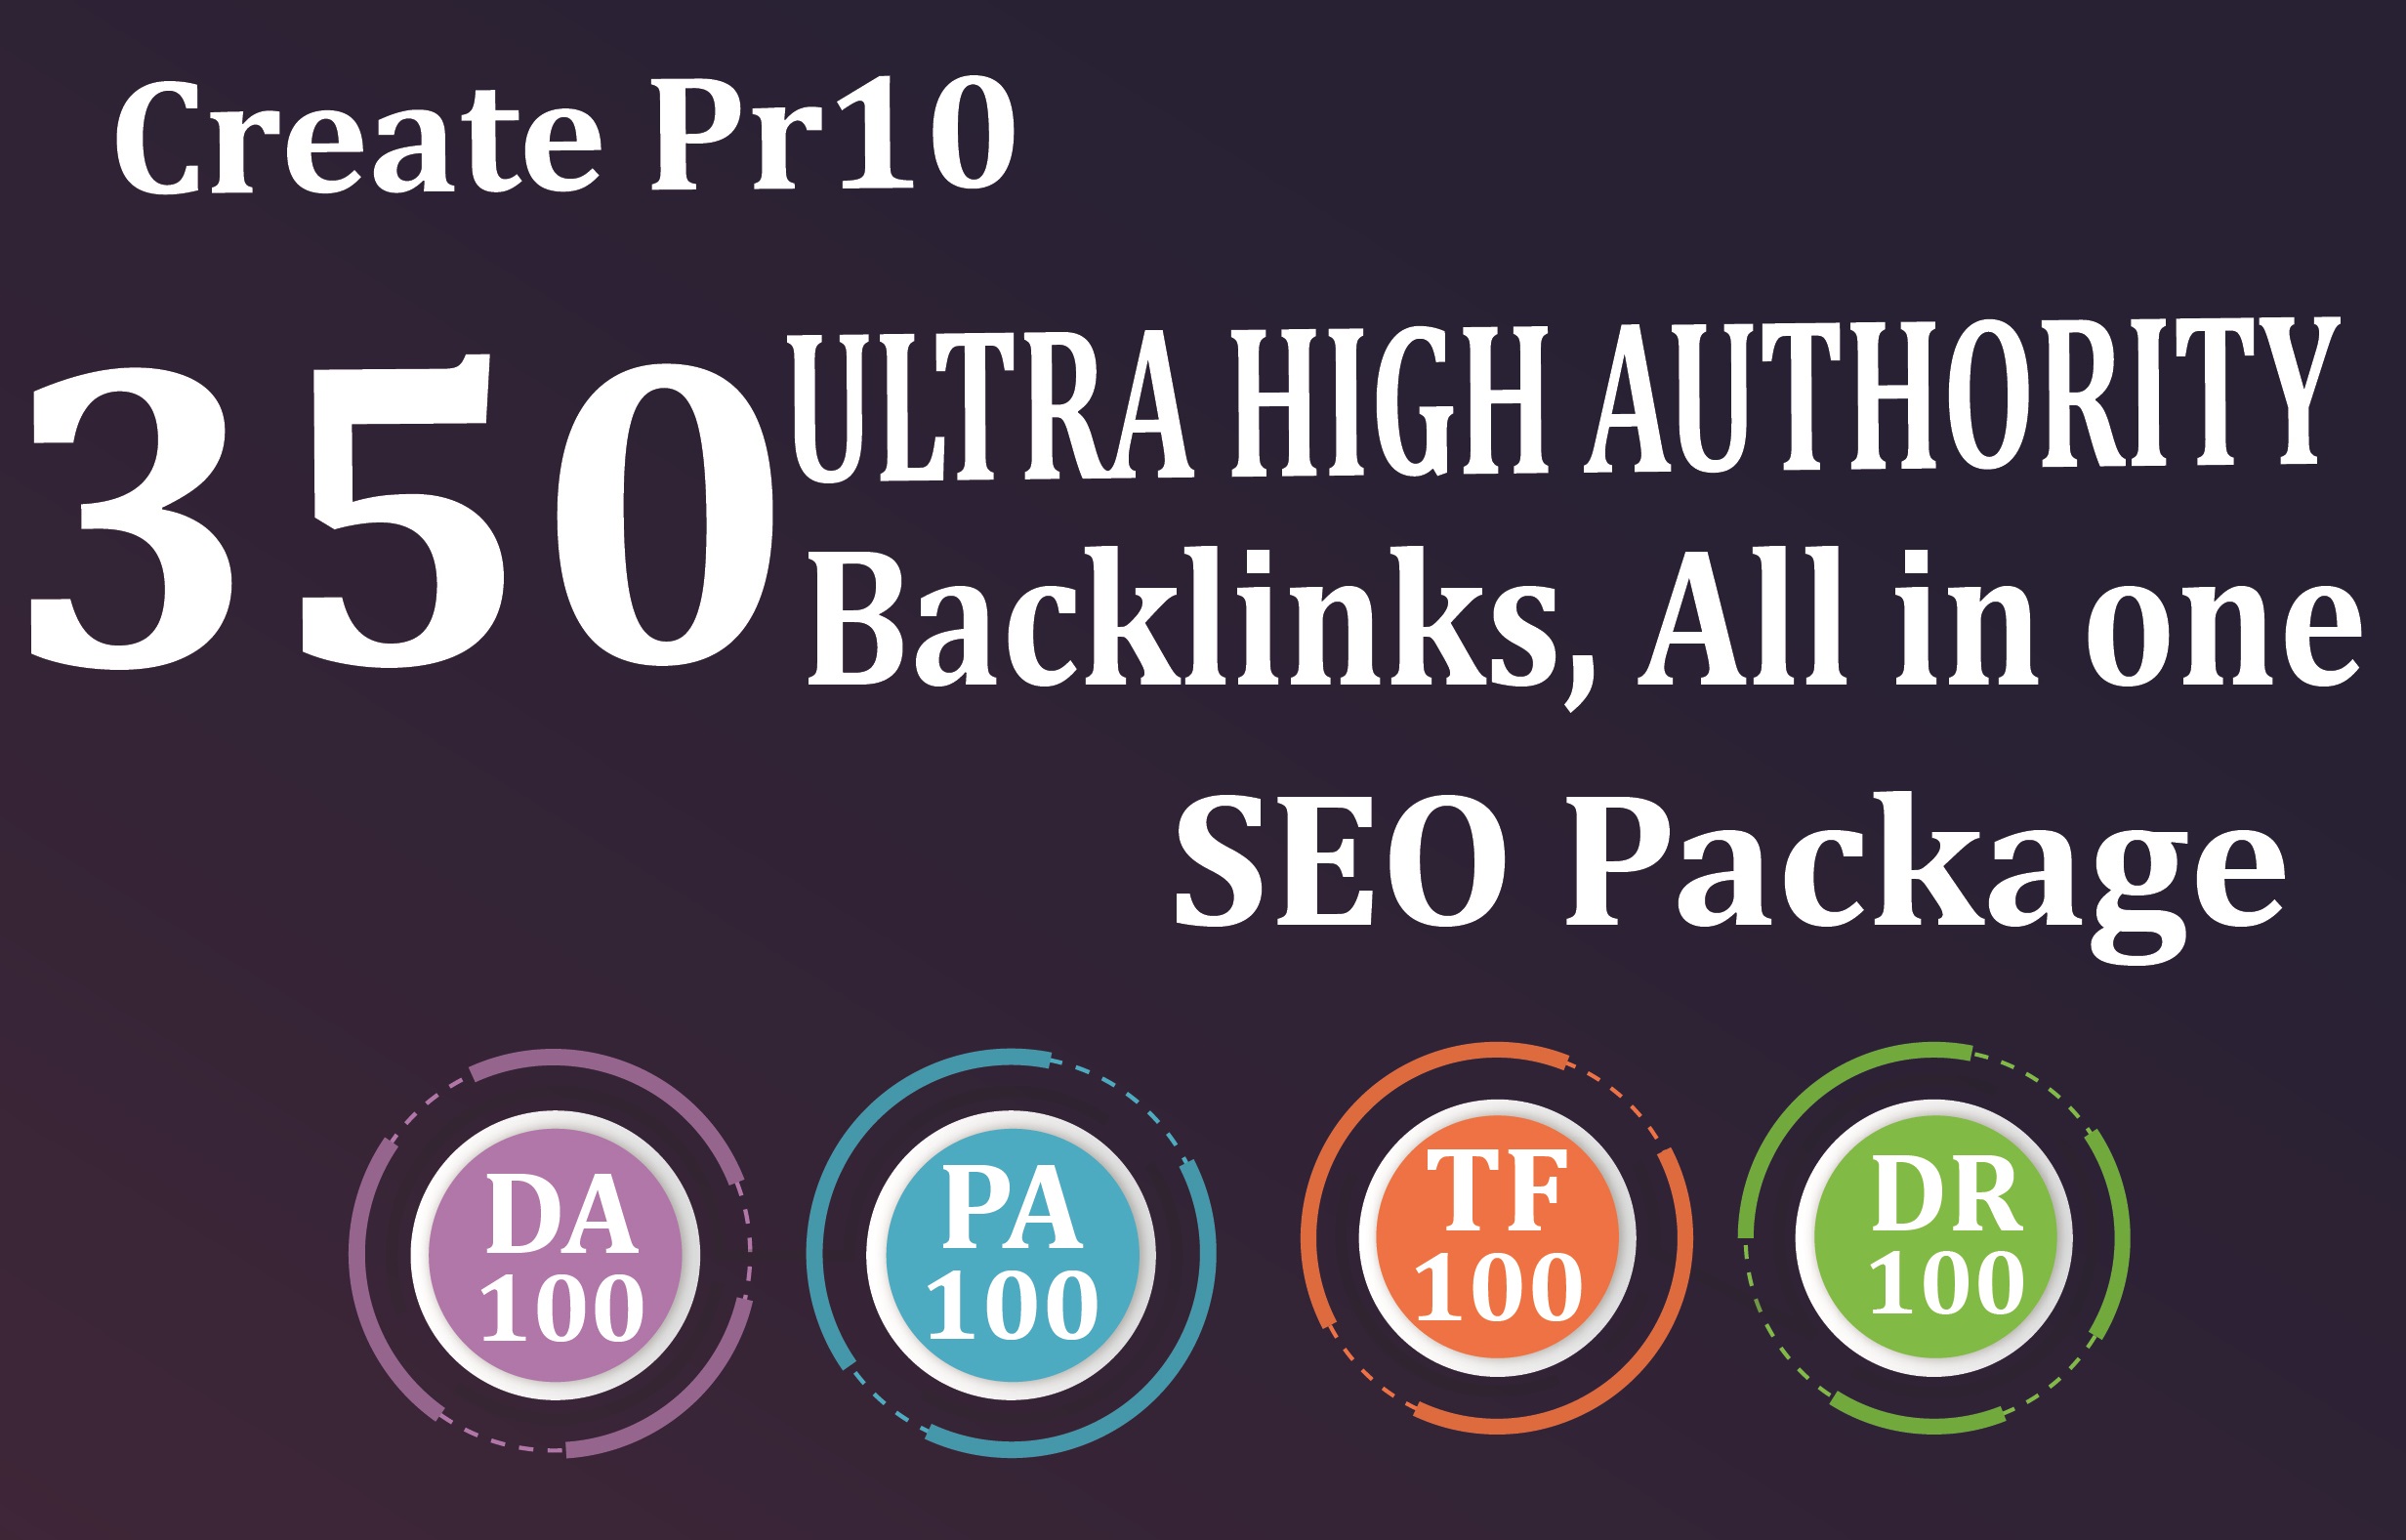 Create 350 PR-10 ULTRA HIGH AUTHORITY Backlinks, All in one SEO Package